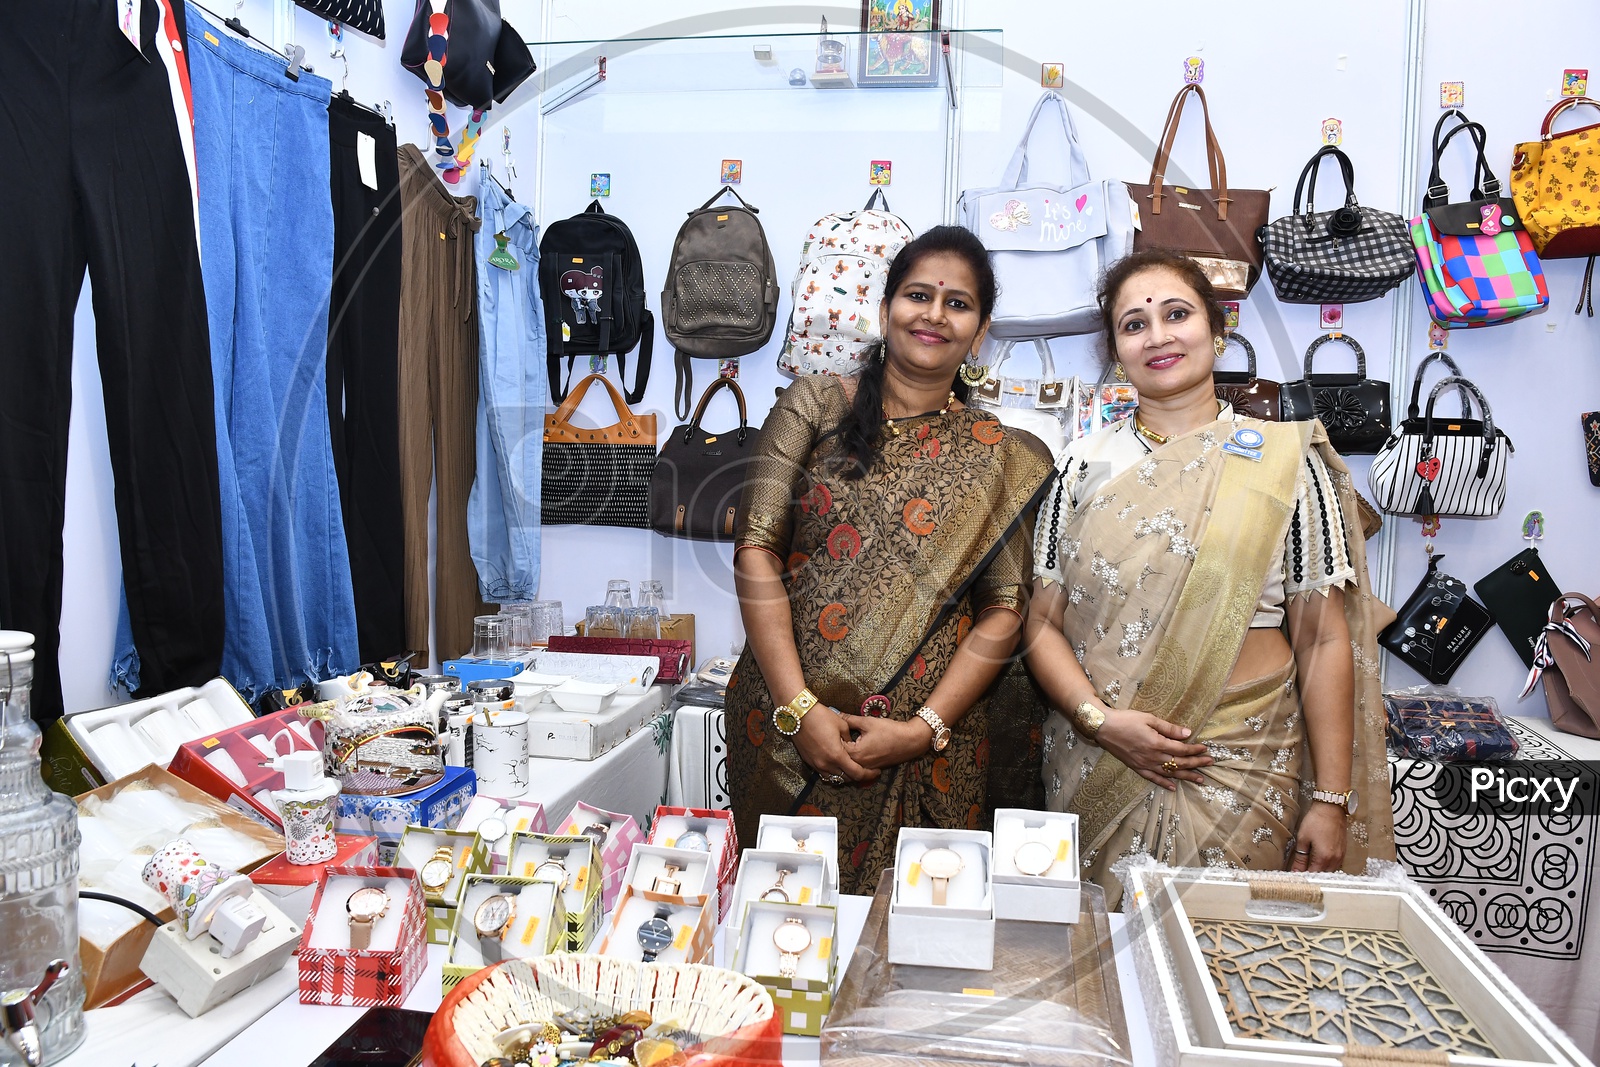 Women with their customized jewelry for sale in the exhibition